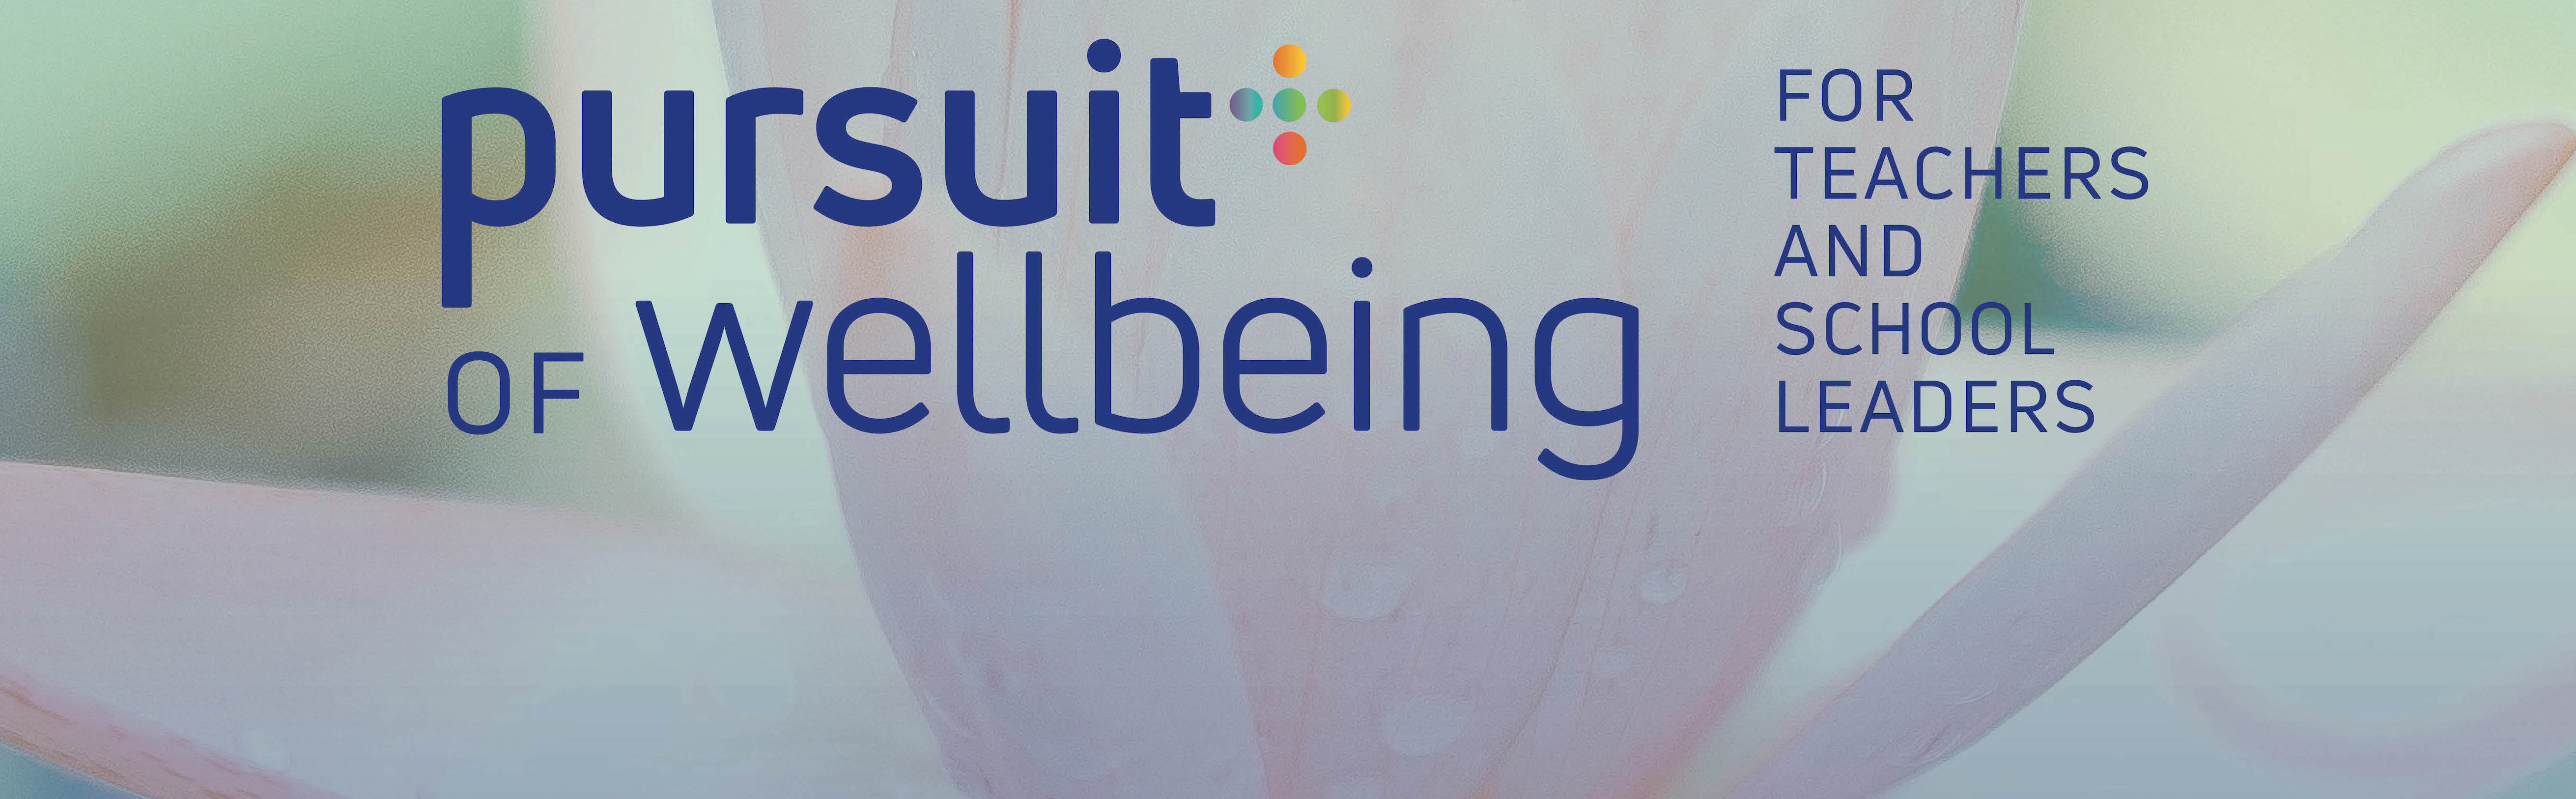 The Pursuit of Wellbeing